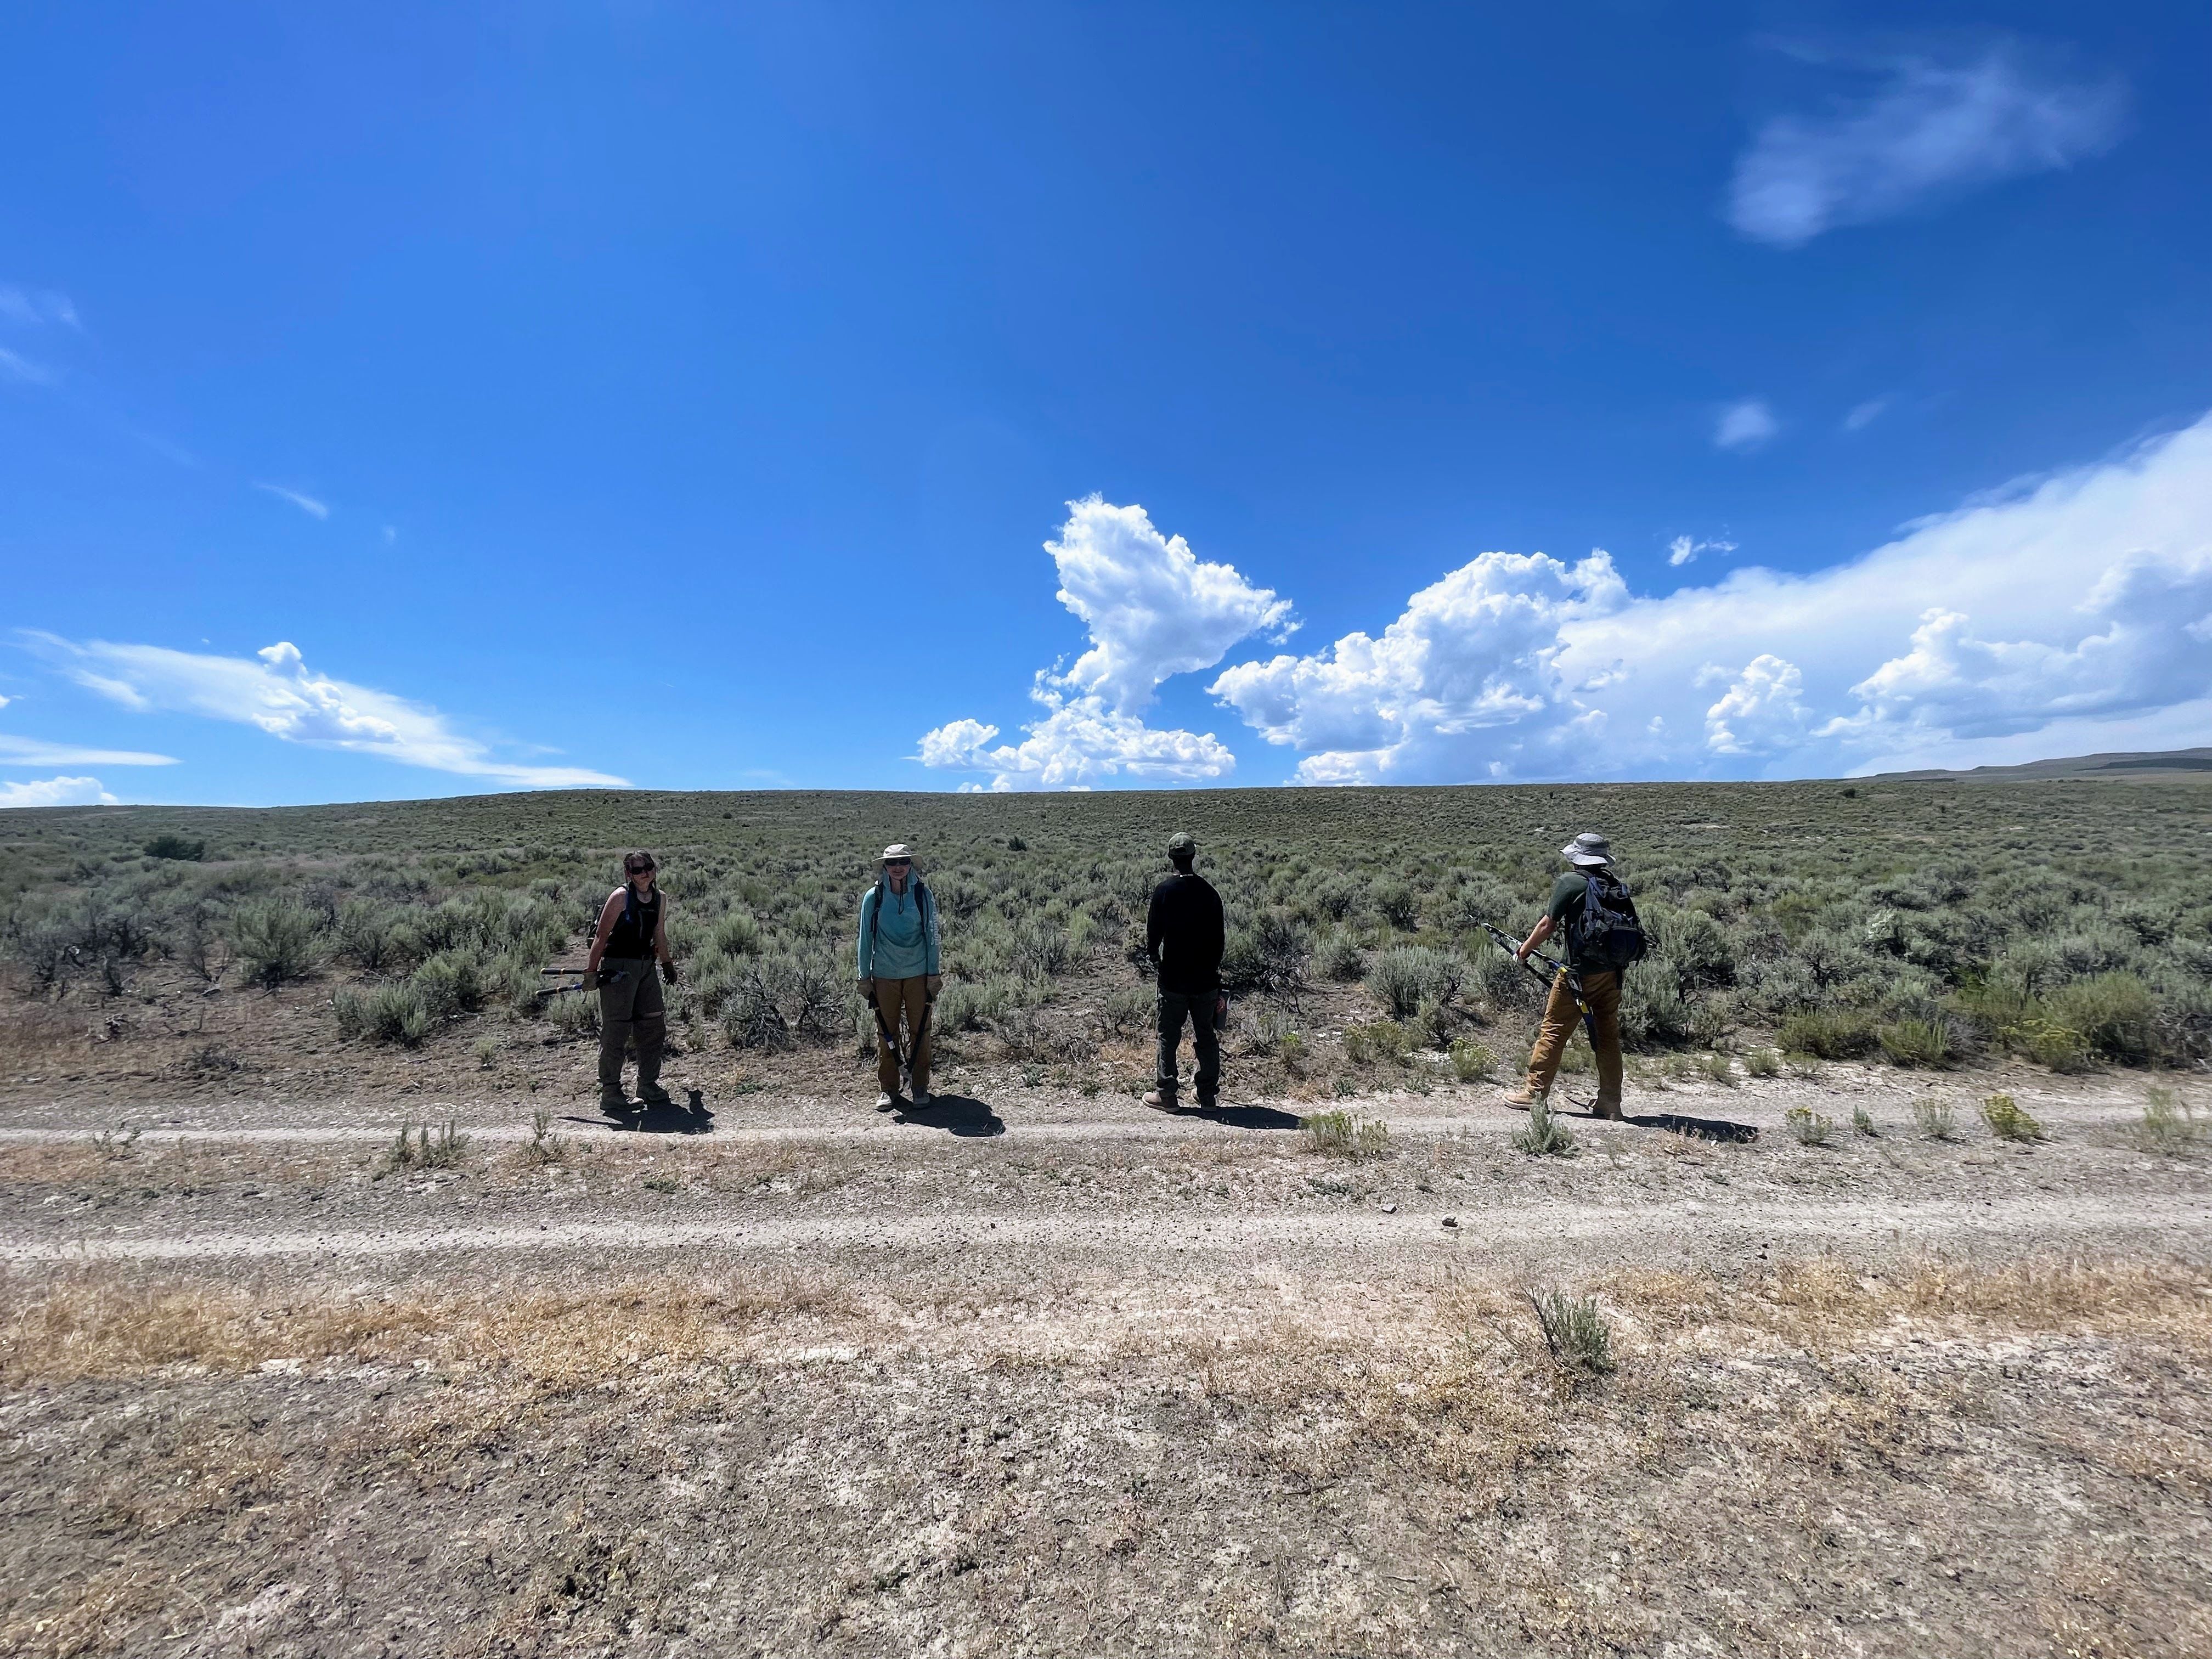 A crew stands on a dirt road in the desert with a bright blue sky and sagebrush behind him.